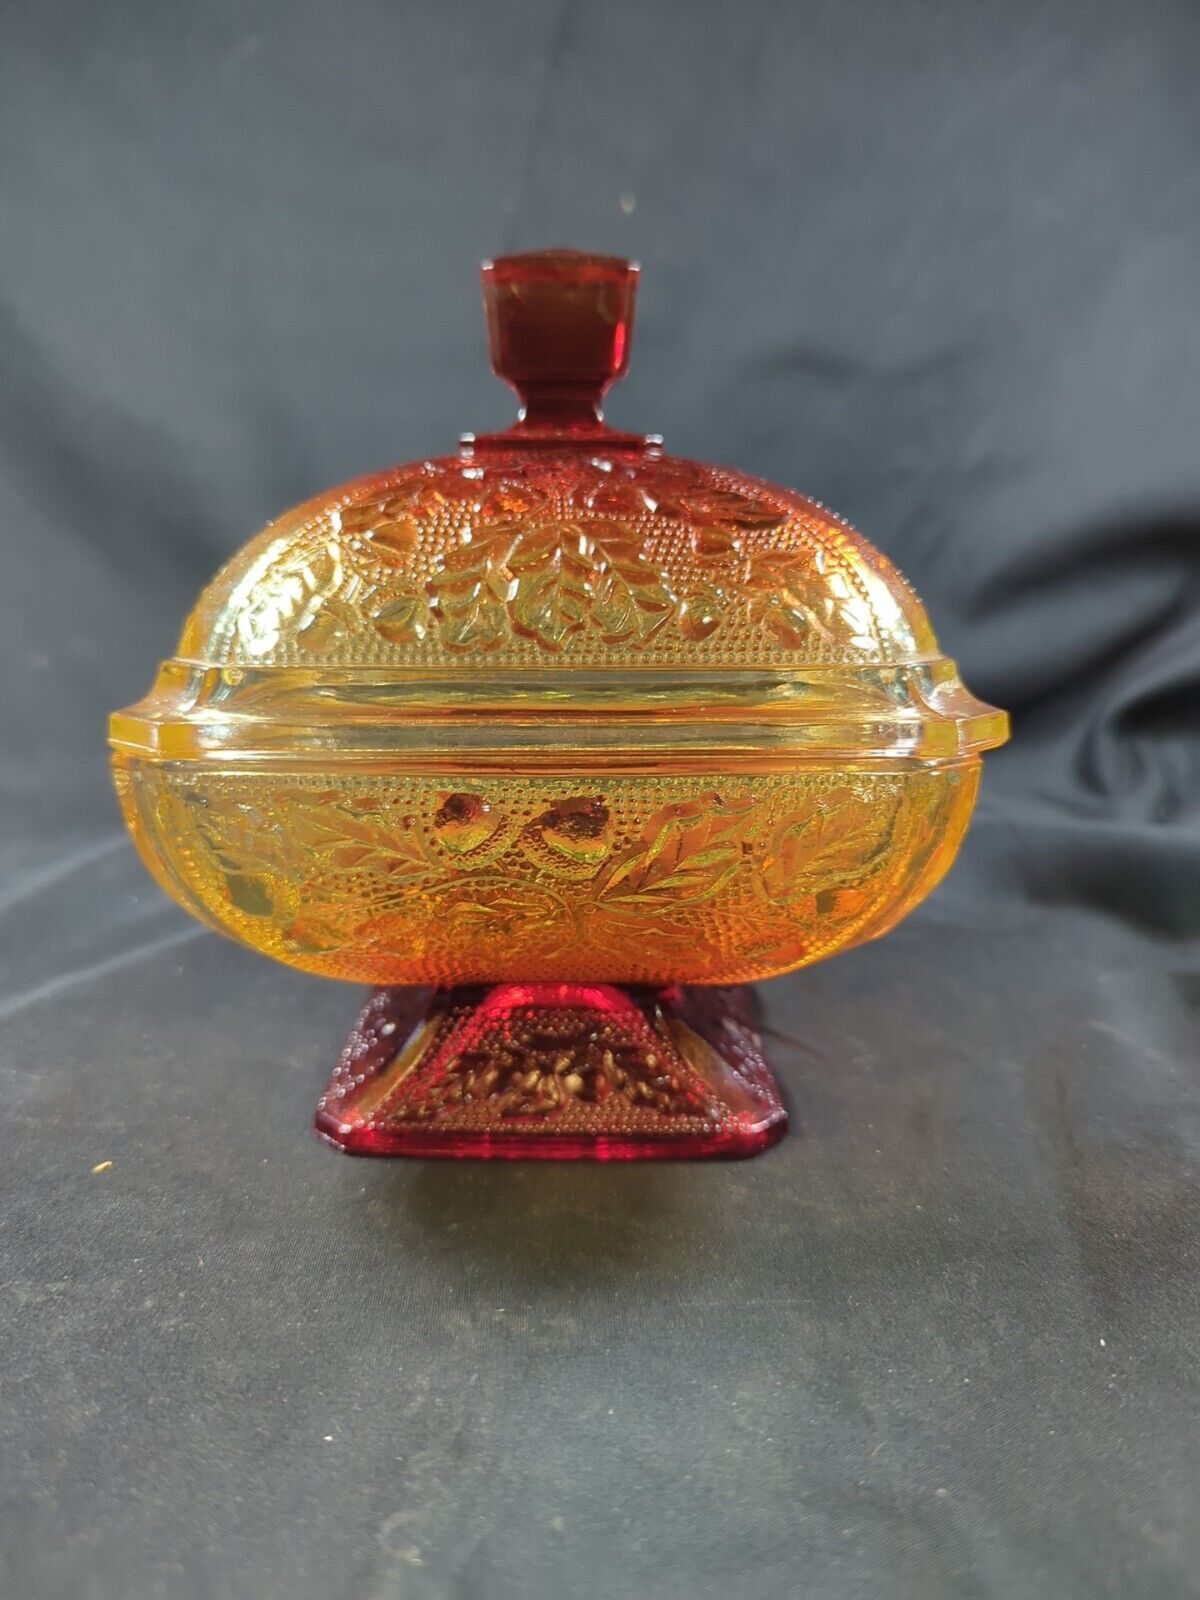 Vintage Mid Century Amberina Depression Glass Candy Dish Chestnuts Leaves Design